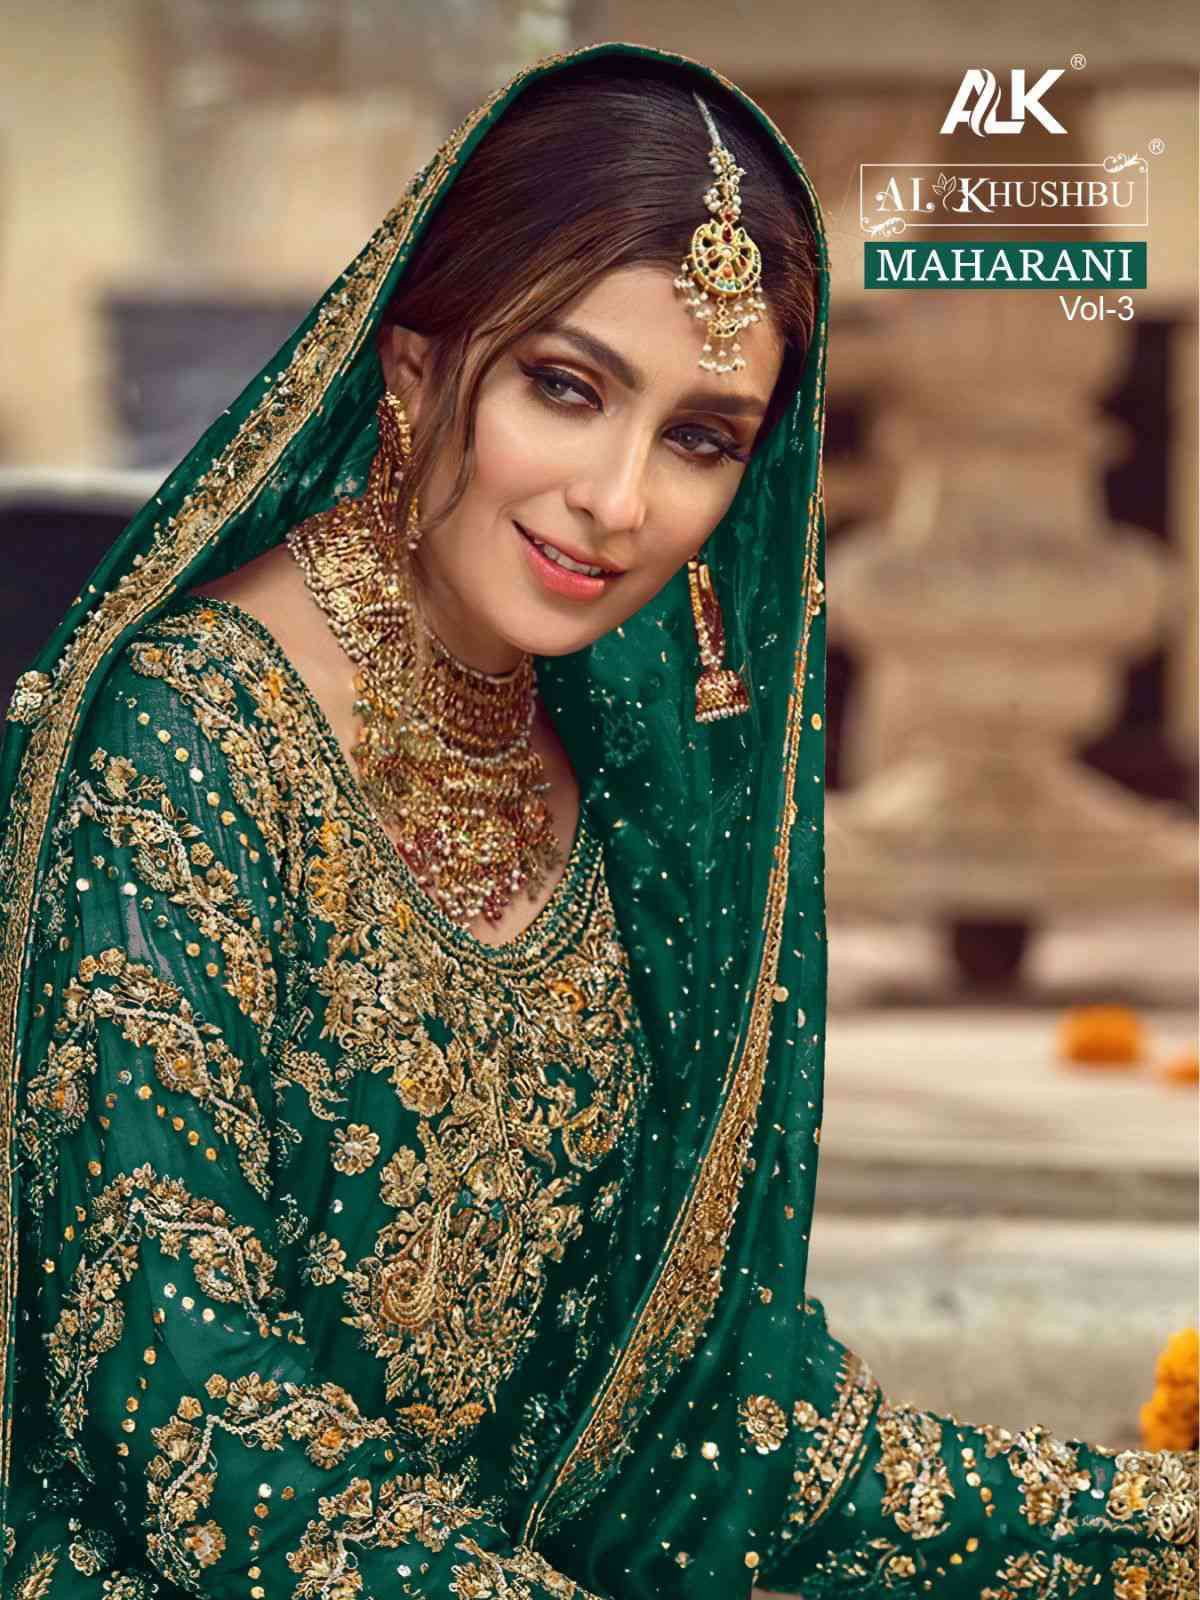 AL KHUSHBU MAHARANI VOL 3 FAUX GEORGETTE EMBROIDERED SUITS A...